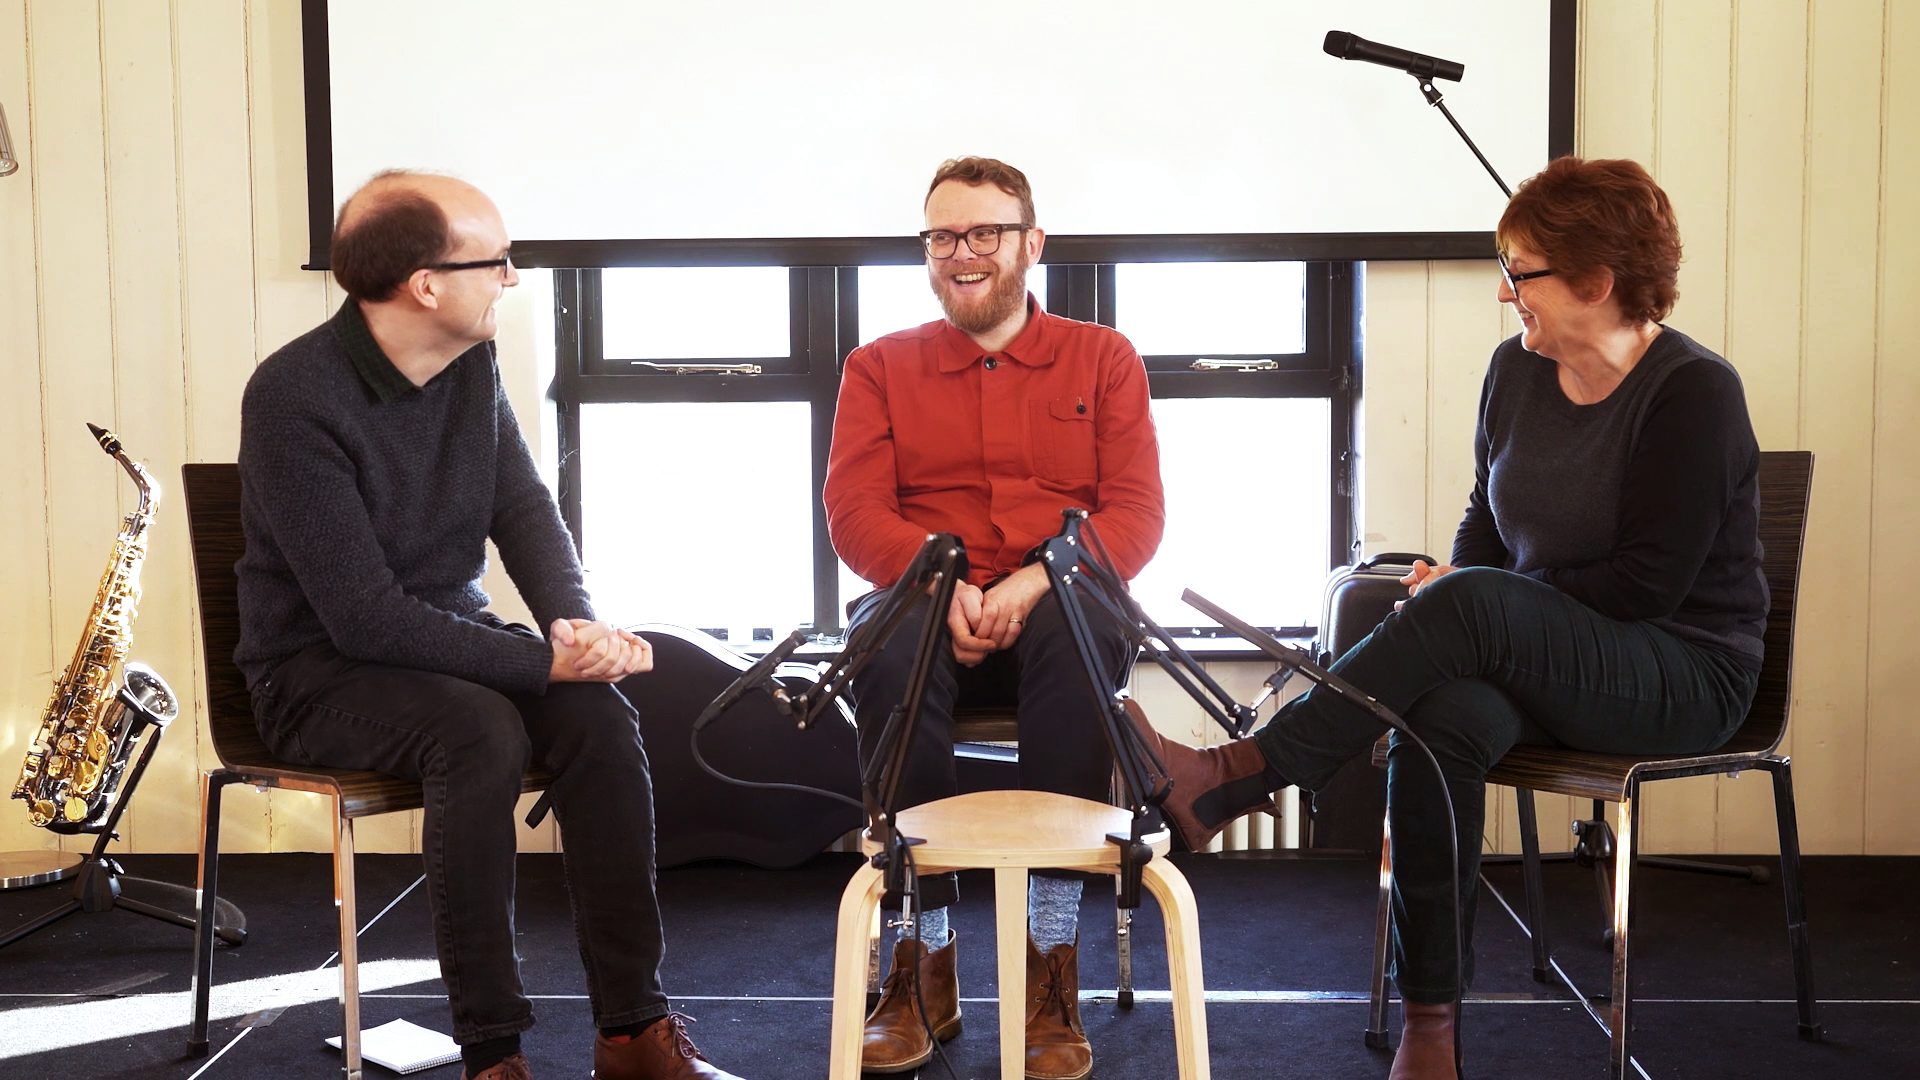 Wales and music: a conversation with Huw Stephens